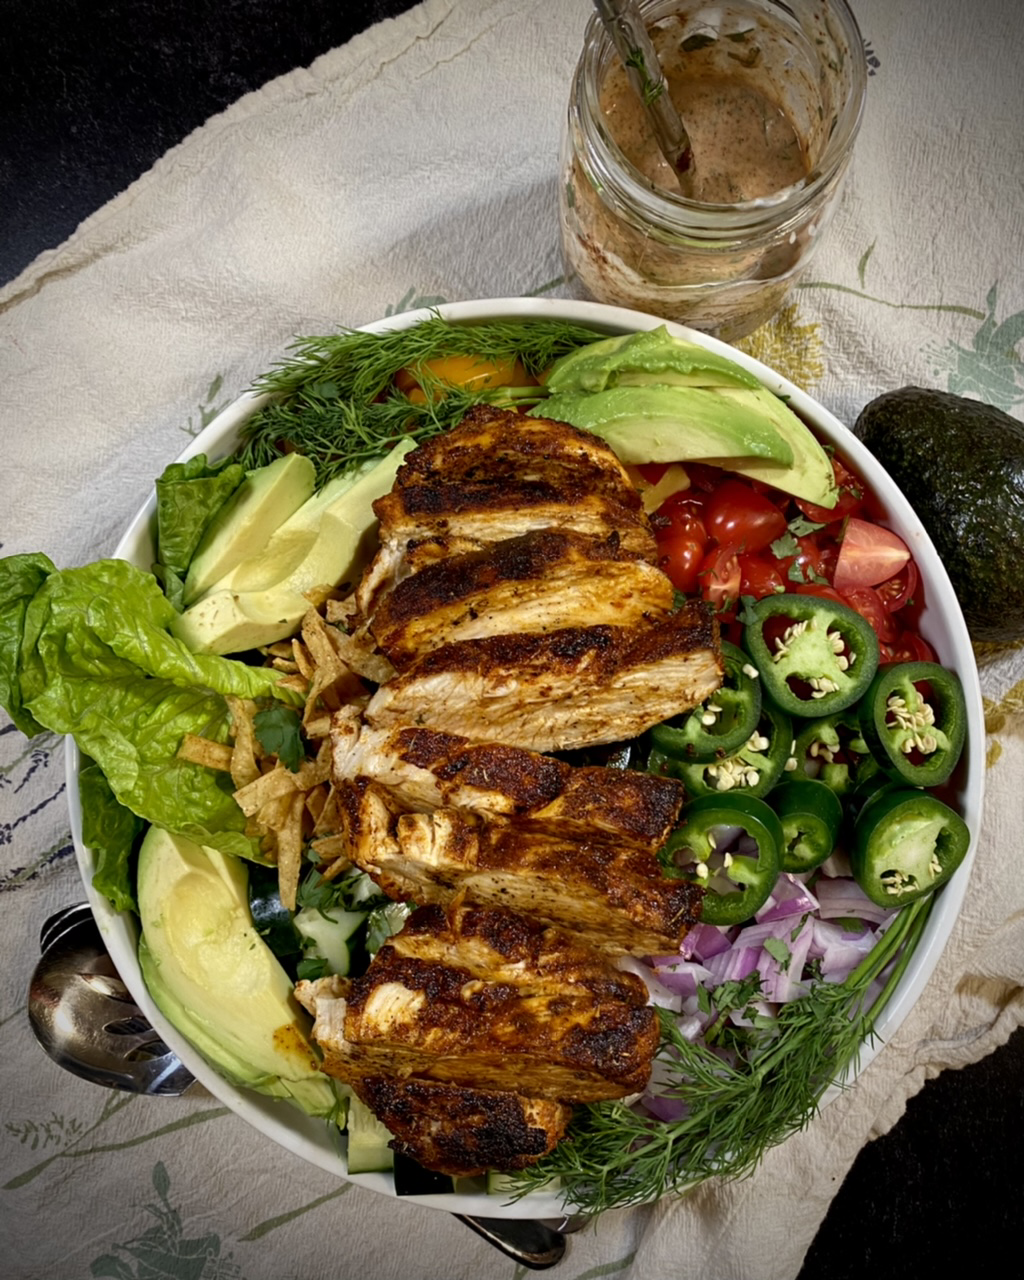 4F0E0A57 FEEC 4212 9BF0 01FF632A91D0 - Roasted Blackened Chicken with a Spicy Southwestern Salad & Salsa Ranch Dressing